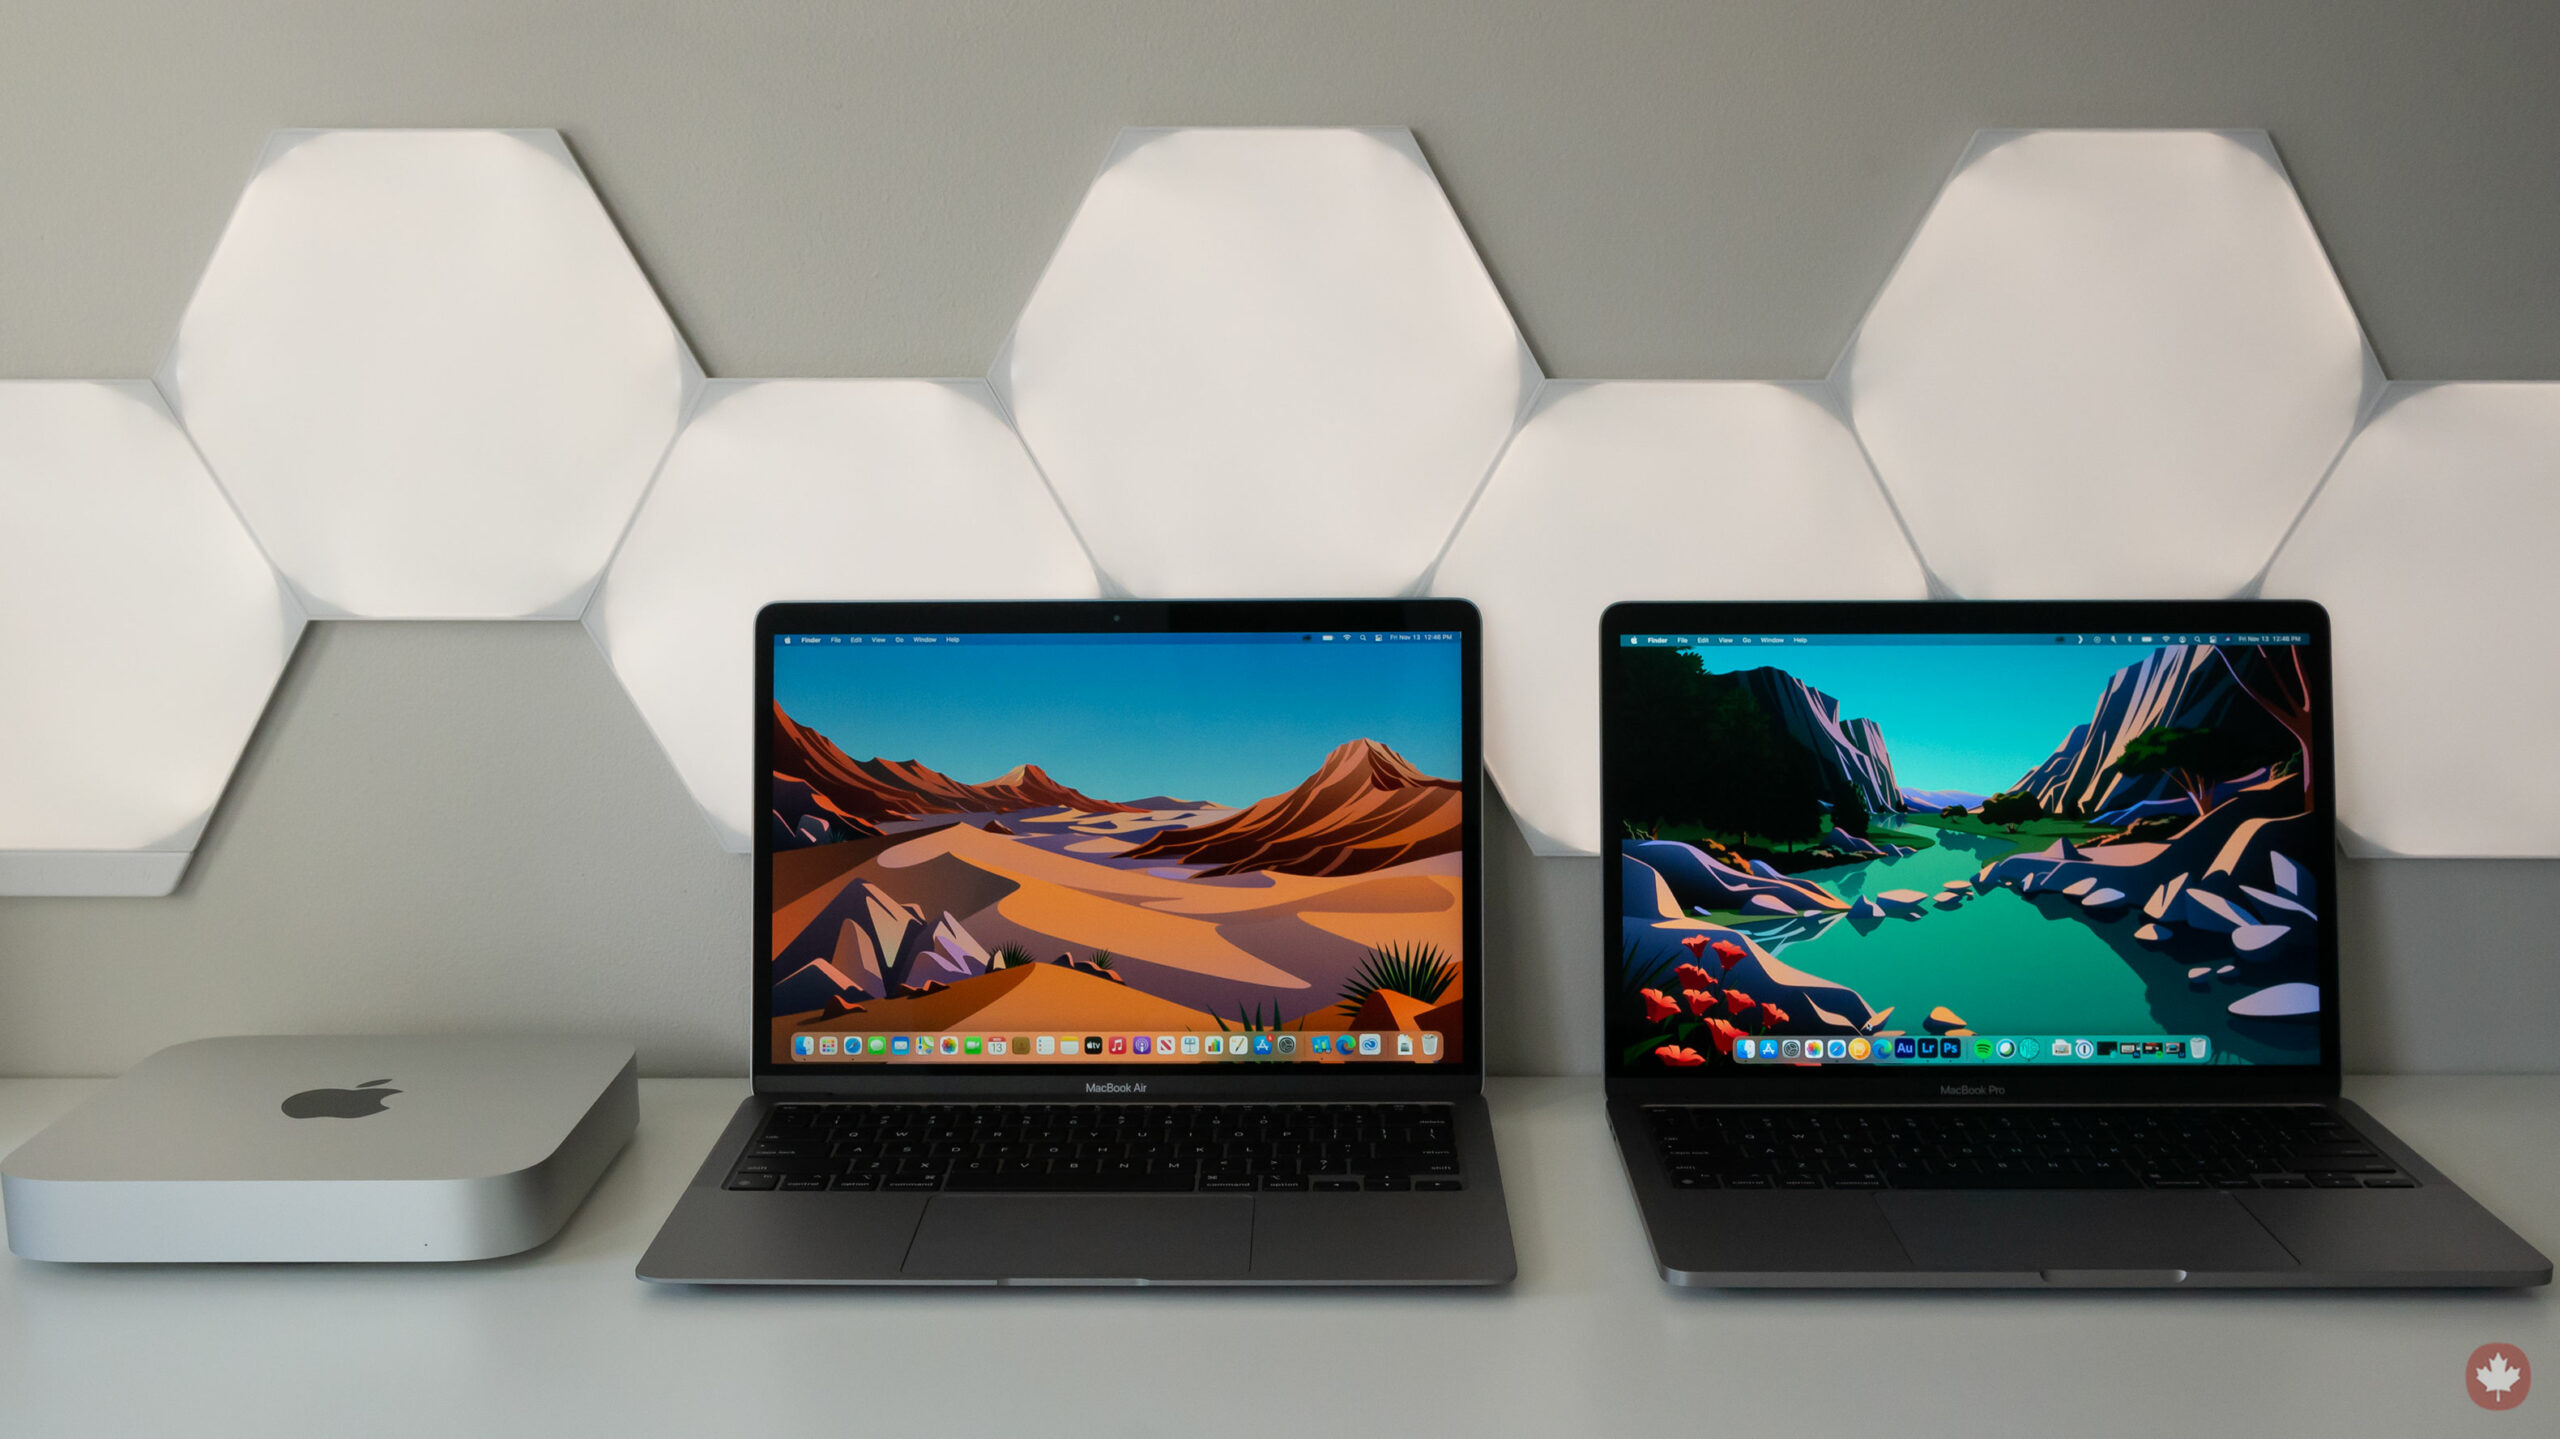 Apple's future: A look at M1-powered MacBook Air, MacBook Pro and